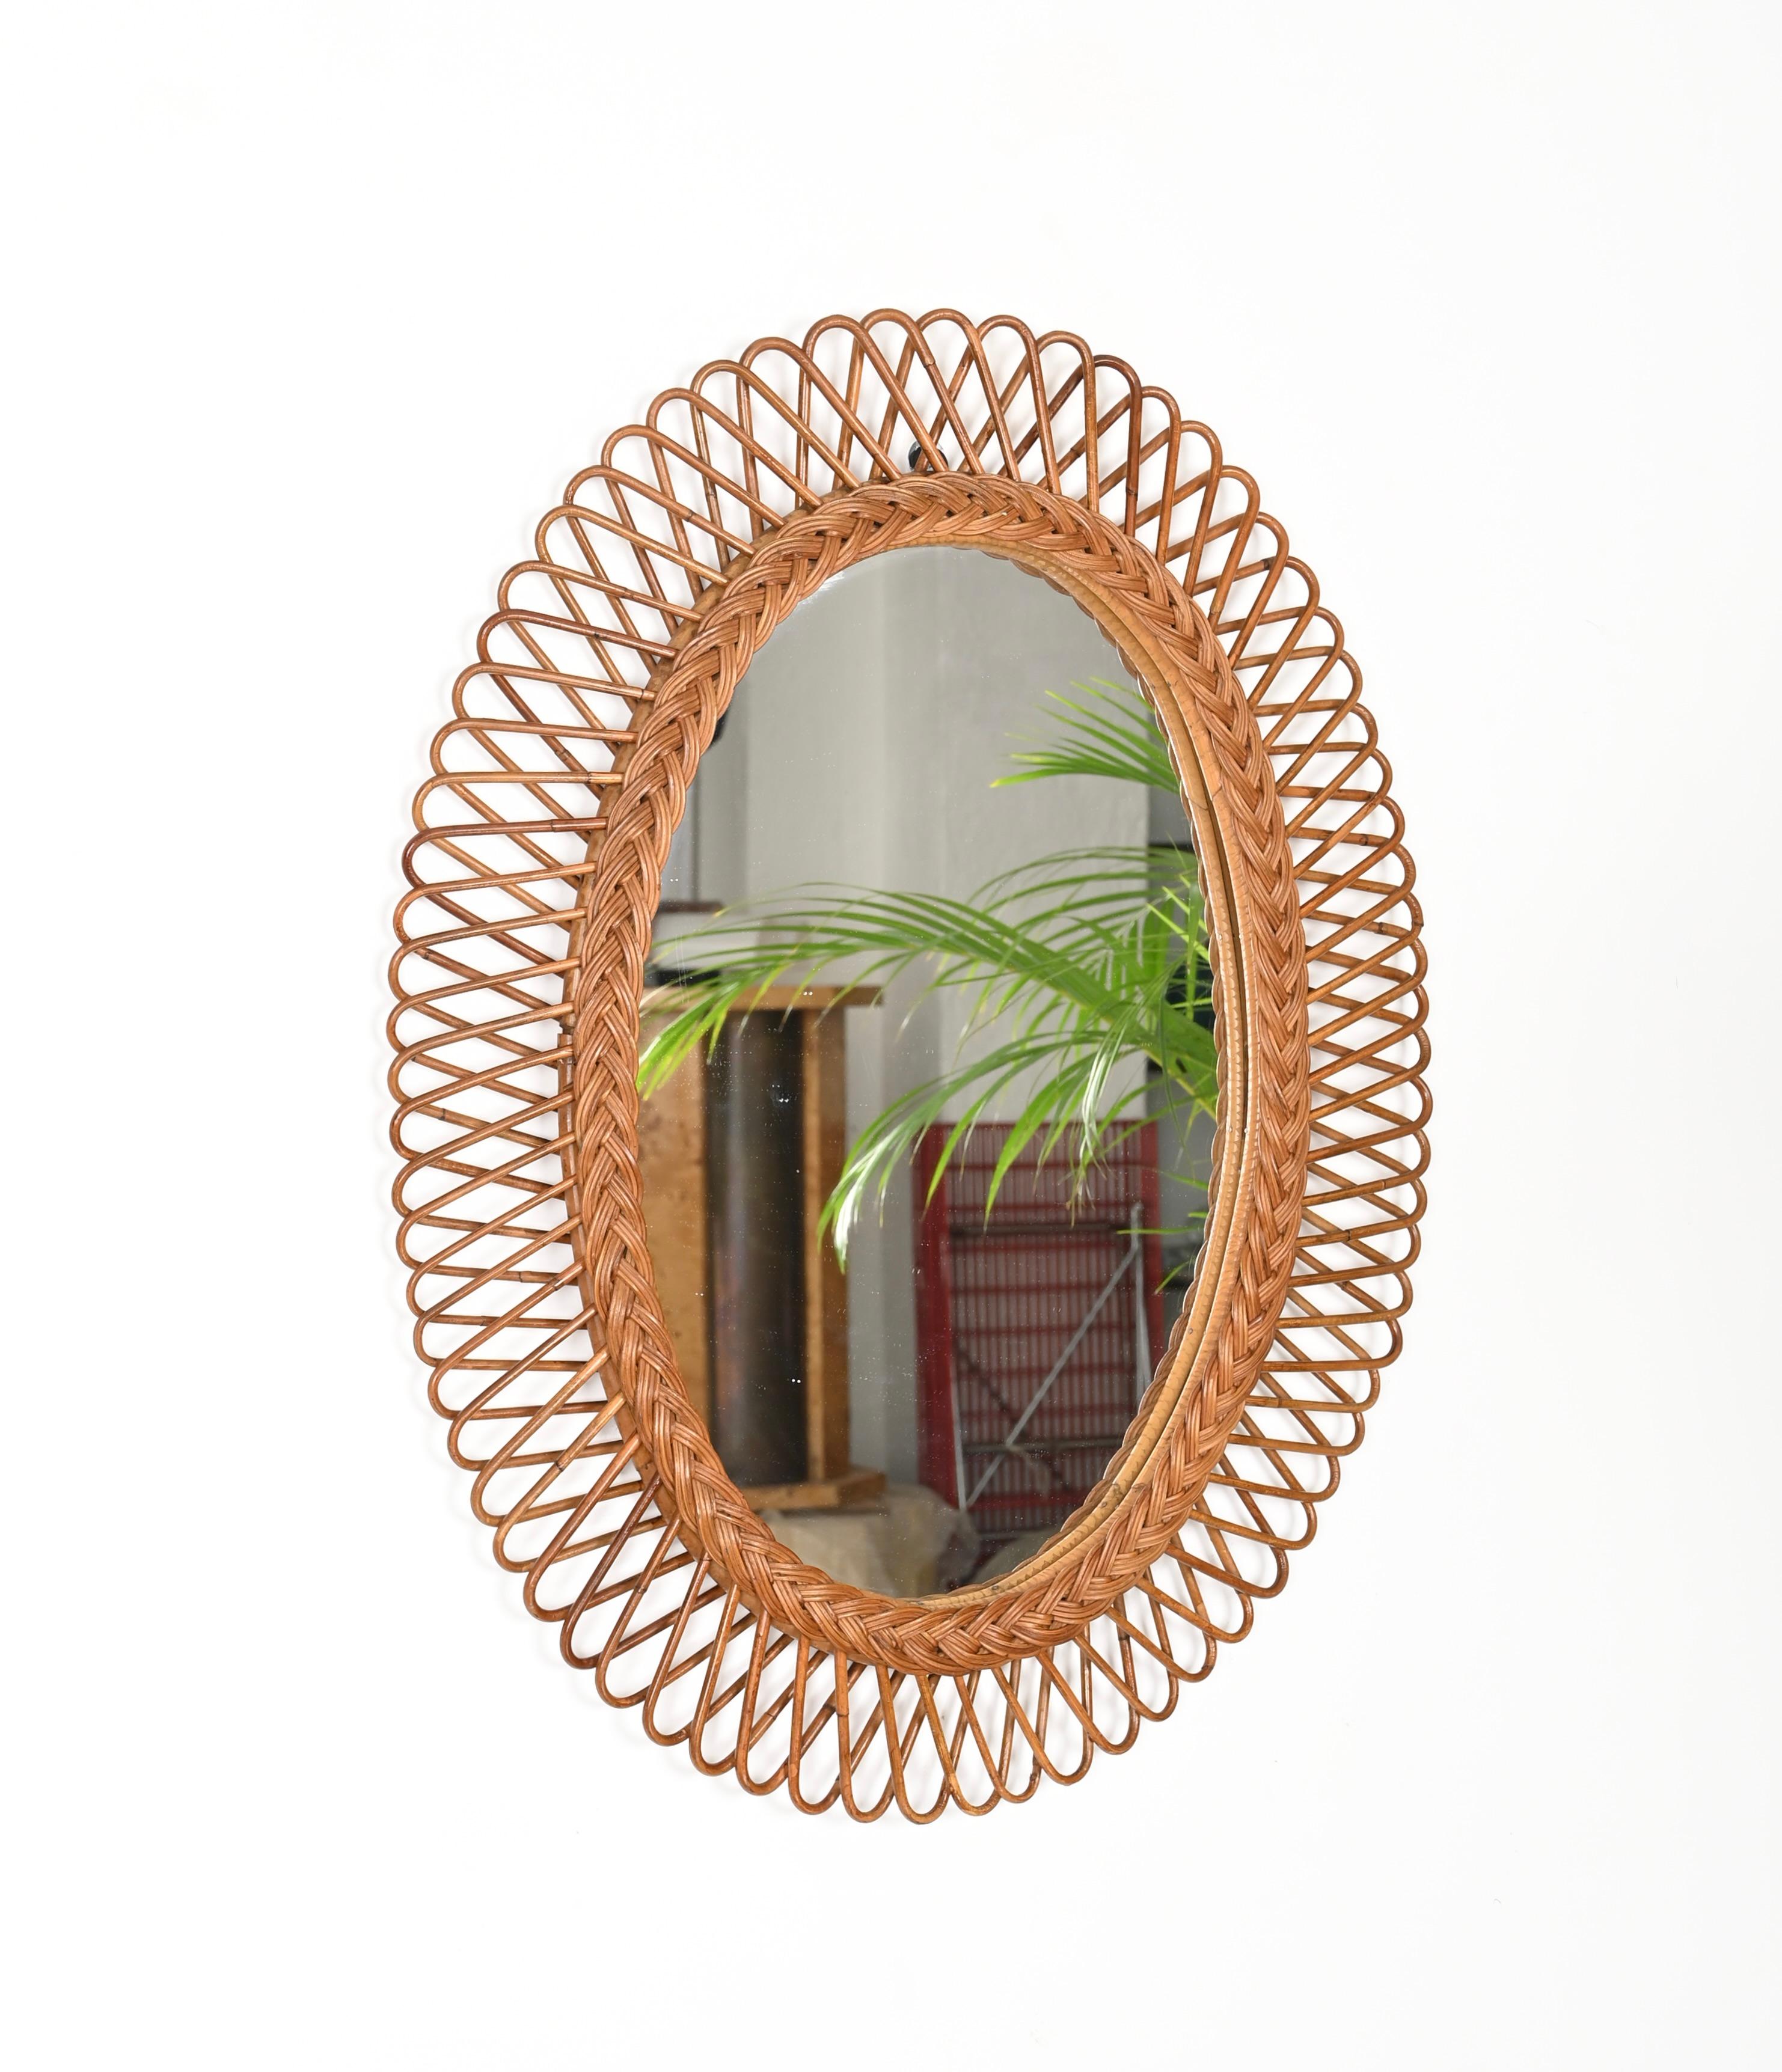 Franco Albini Midcentury  Bamboo, Rattan and Wicker Oval Mirror,  Italy 1970s For Sale 3